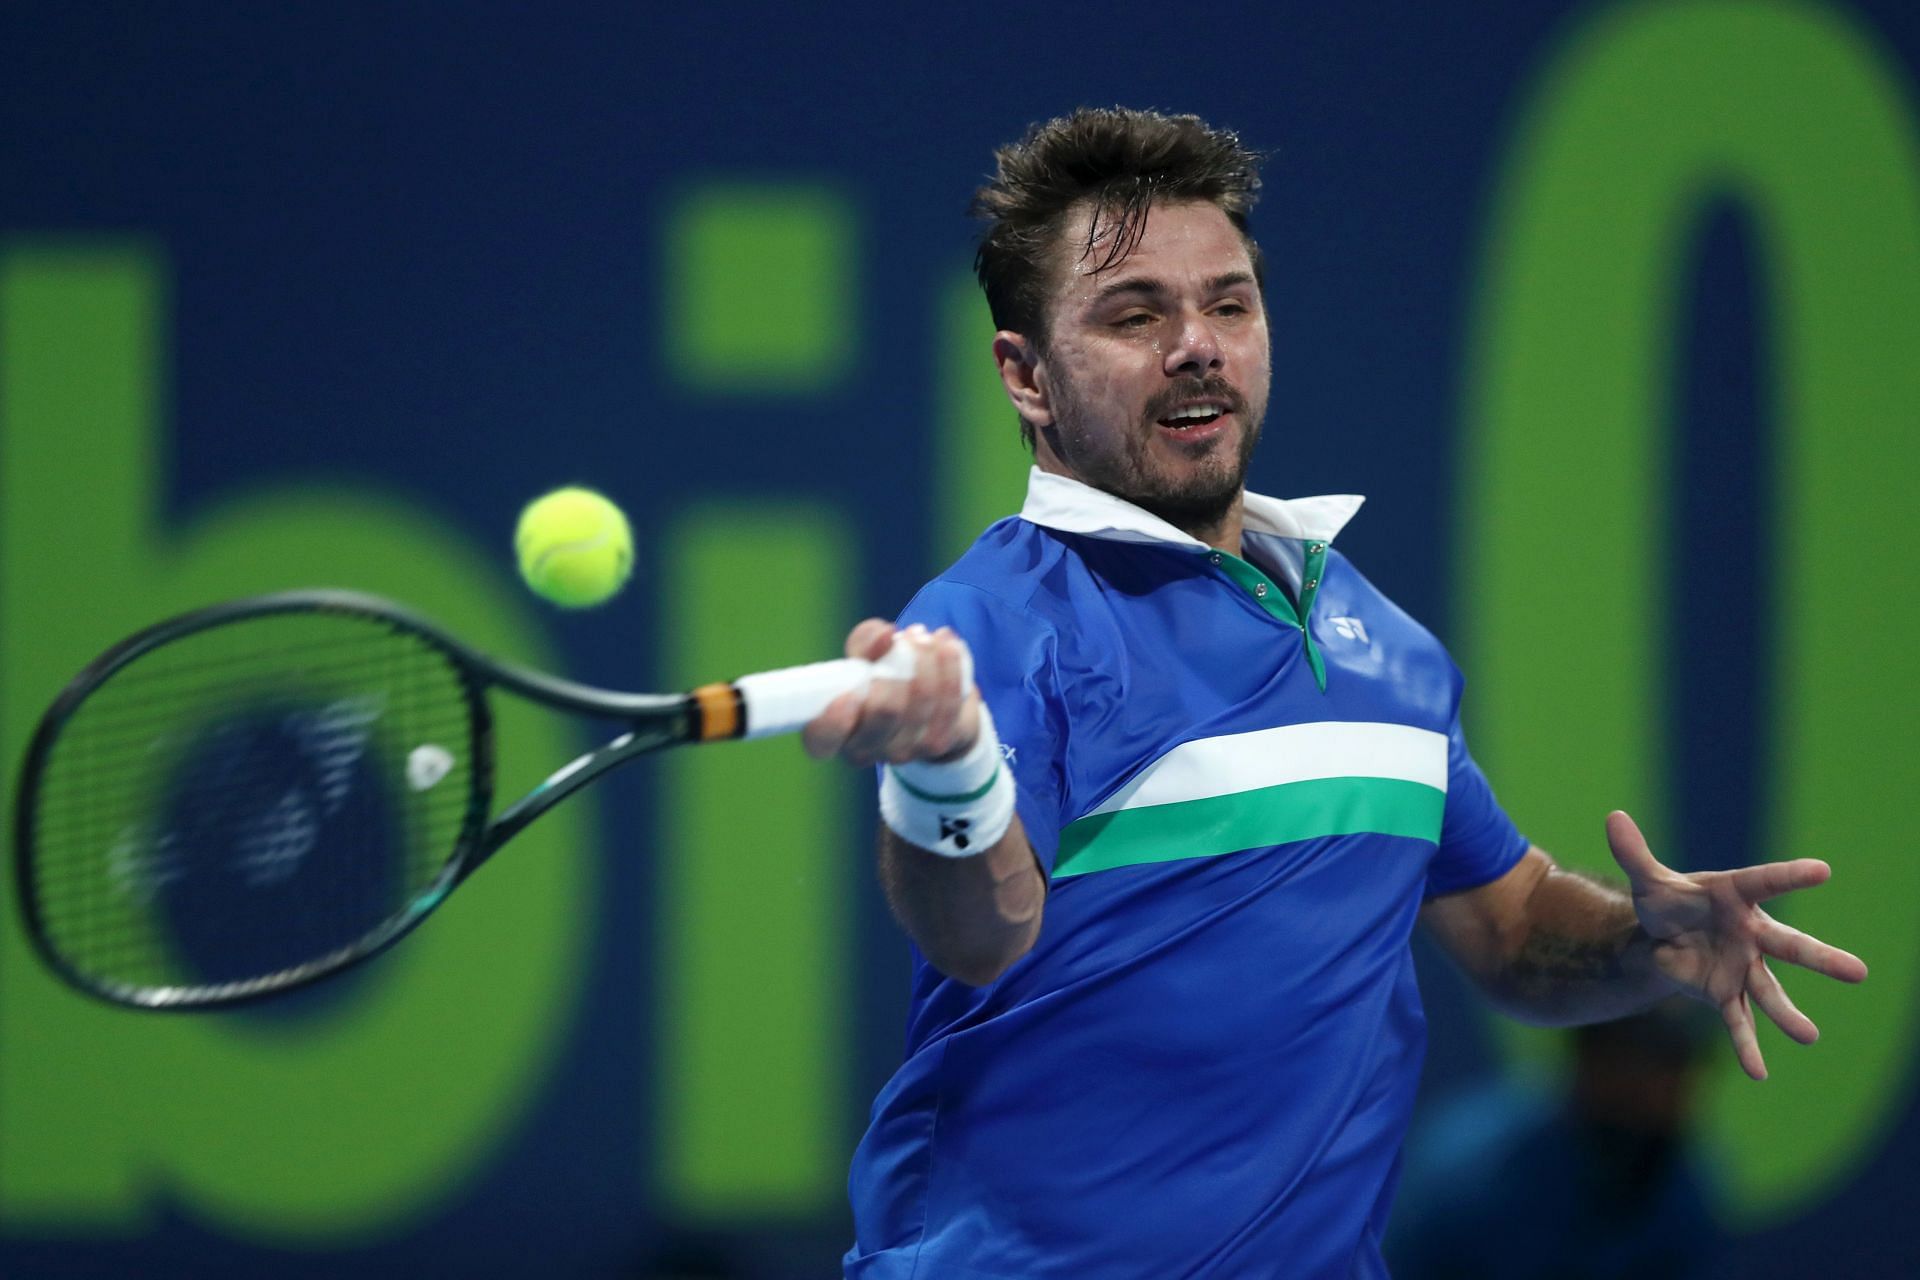 Stan Wawrinka will look to regain his form after a long break due to two foot surgeries last year